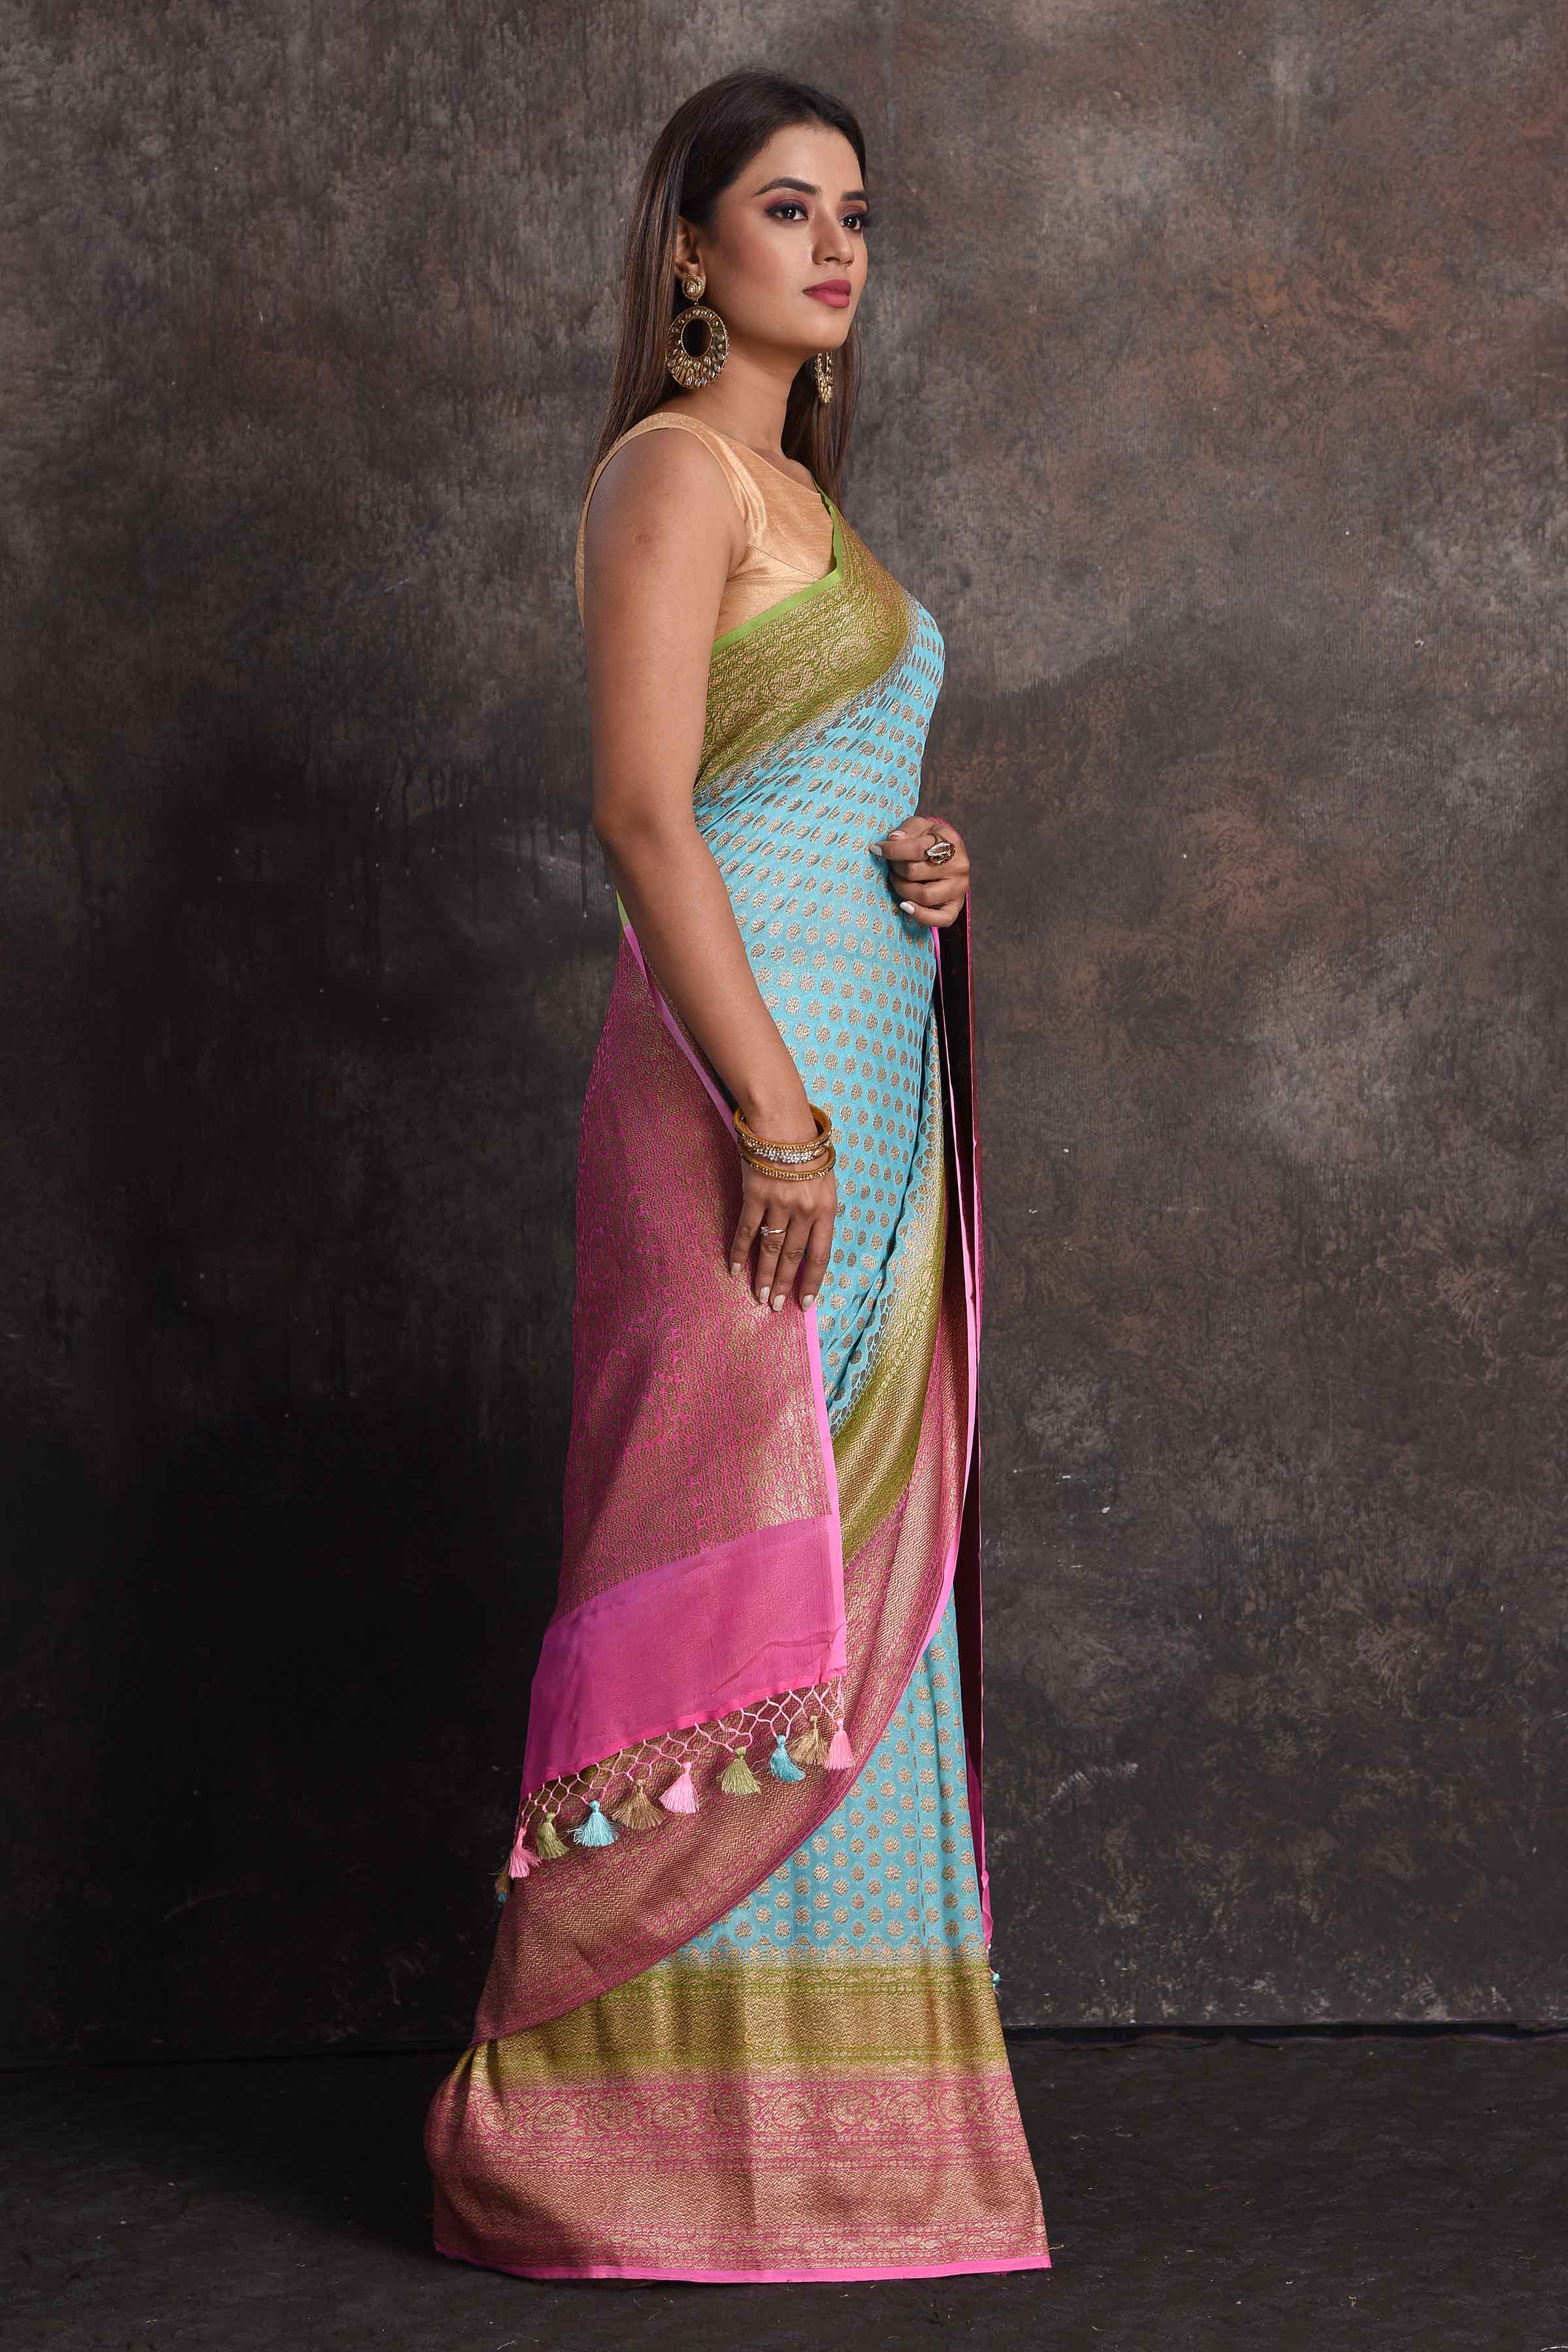 Buy beautiful sky blue georgette Banarasi saree online in USA with pink and green border, Be a vision of ethnic elegance on festive occasions in beautiful designer sarees, silk sarees, handloom sarees, Kanchipuram silk sarees, embroidered sarees from Pure Elegance Indian saree store in USA. -right